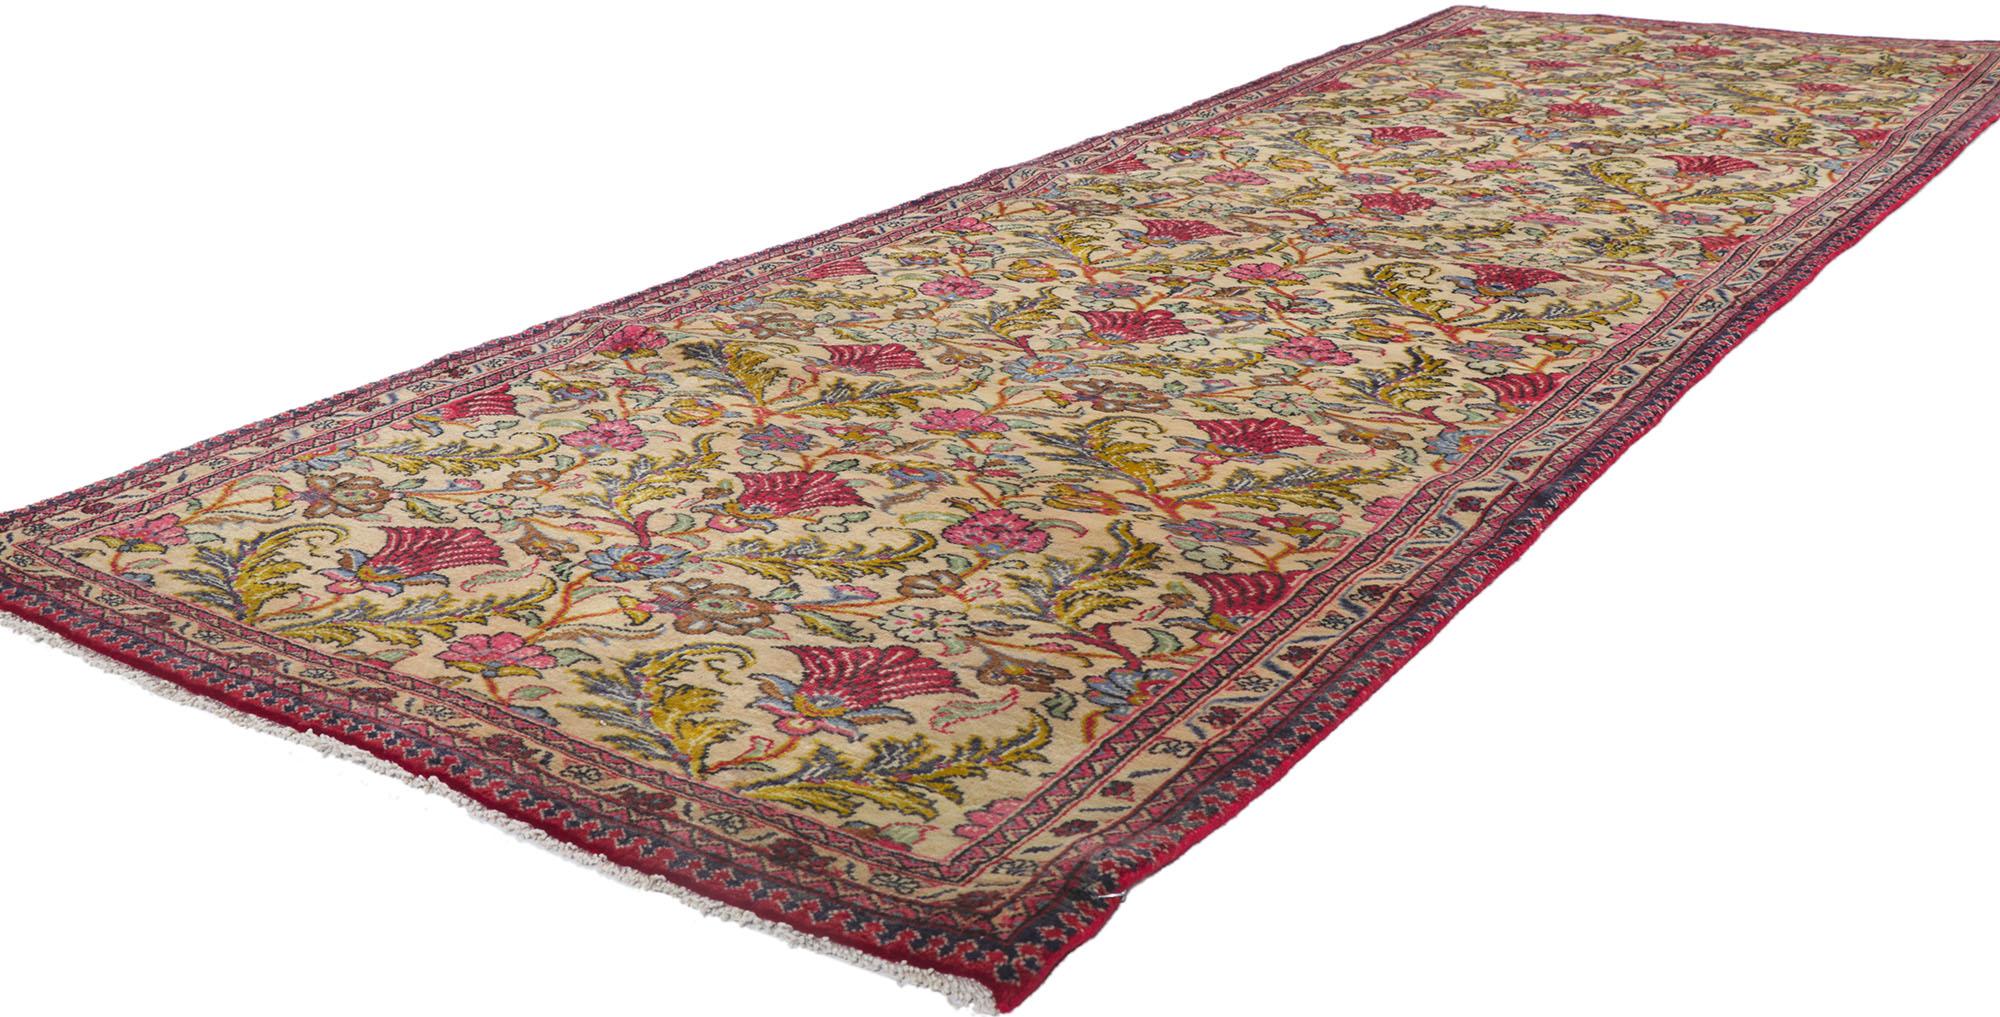 61020 Vintage Persian Qum Runner,  03'03 x 09'07

Perfect for a hallway, long entry, grand foyer, designer entryway, galley kitchen, corridor, long stair landing, grand parlor, home office, private library, conservatory, wine cellar, executive